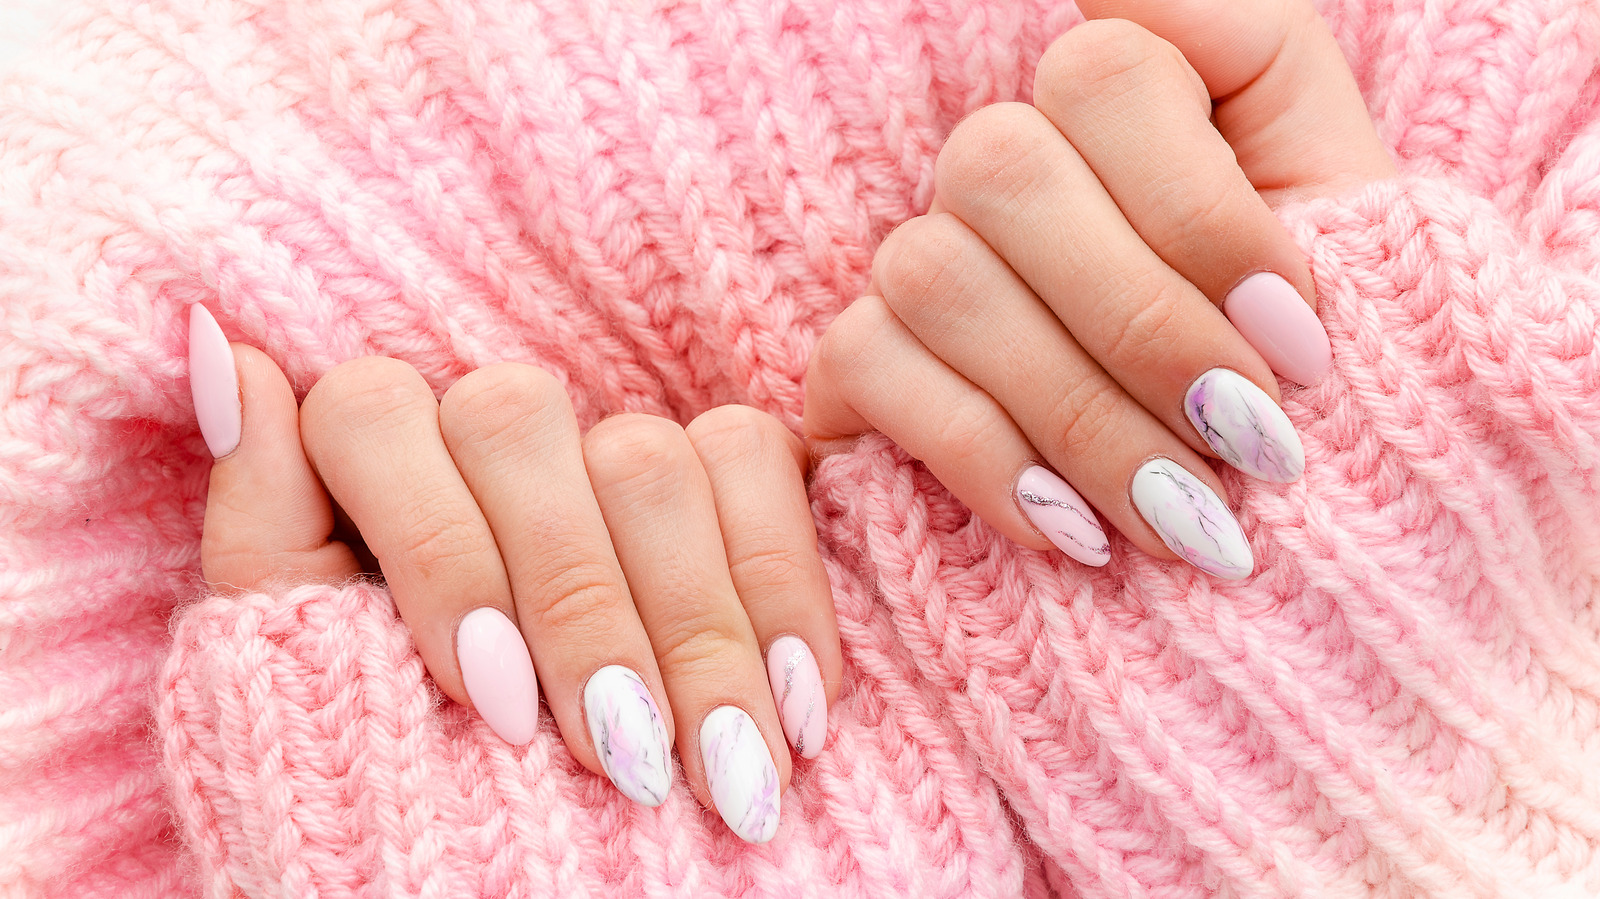 4. Nail Polish Tips for Aging Hands - wide 5